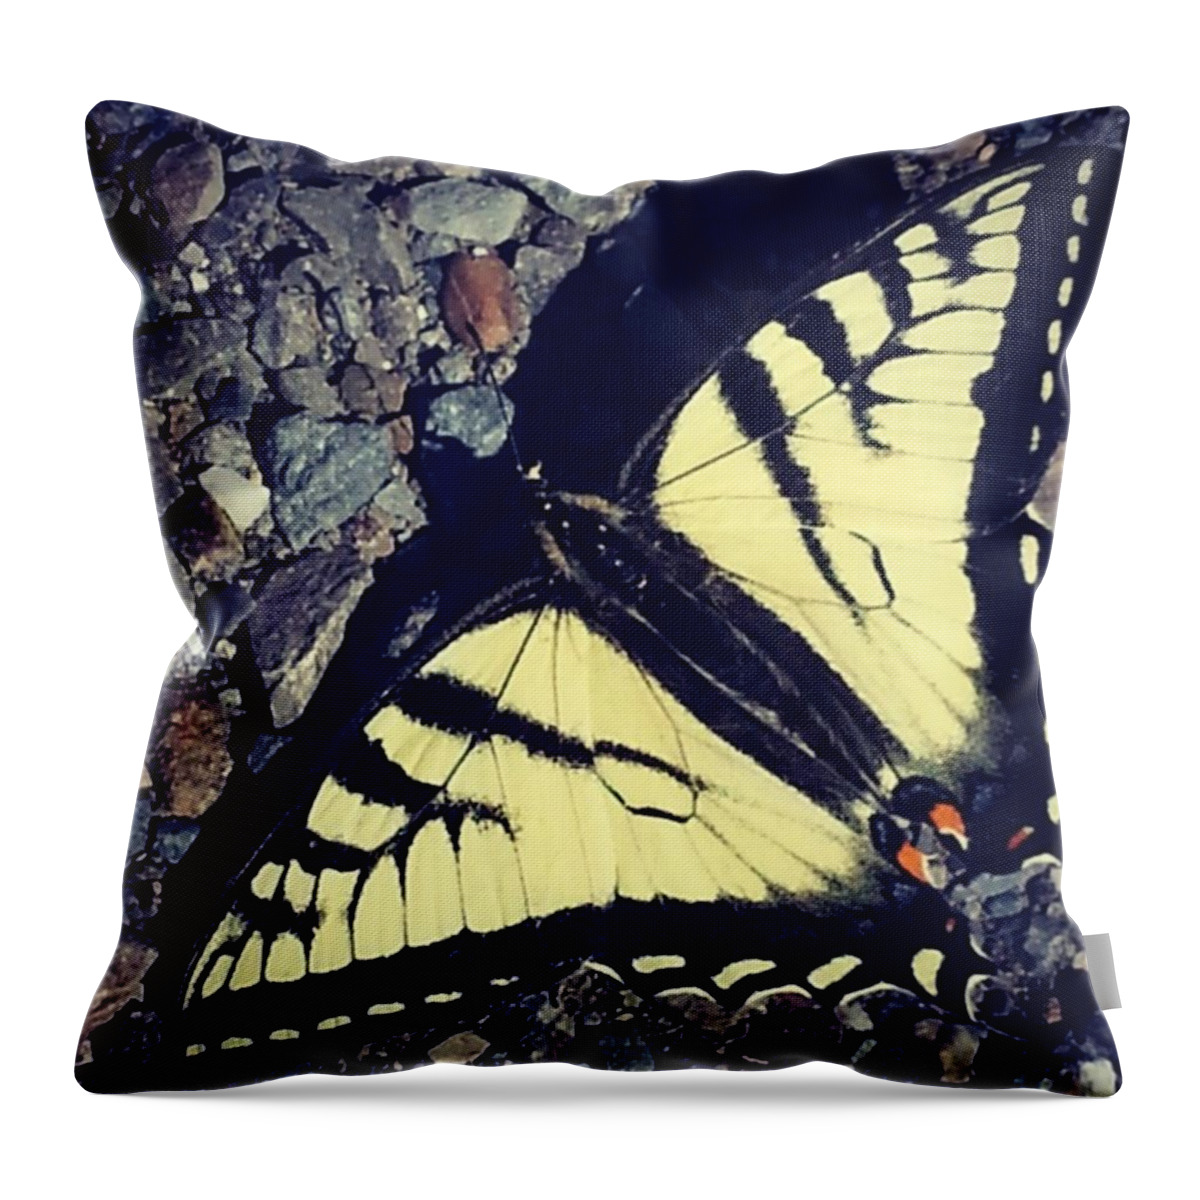 Still Throw Pillow featuring the photograph Butterfly by Lisa Amakye-Ansah